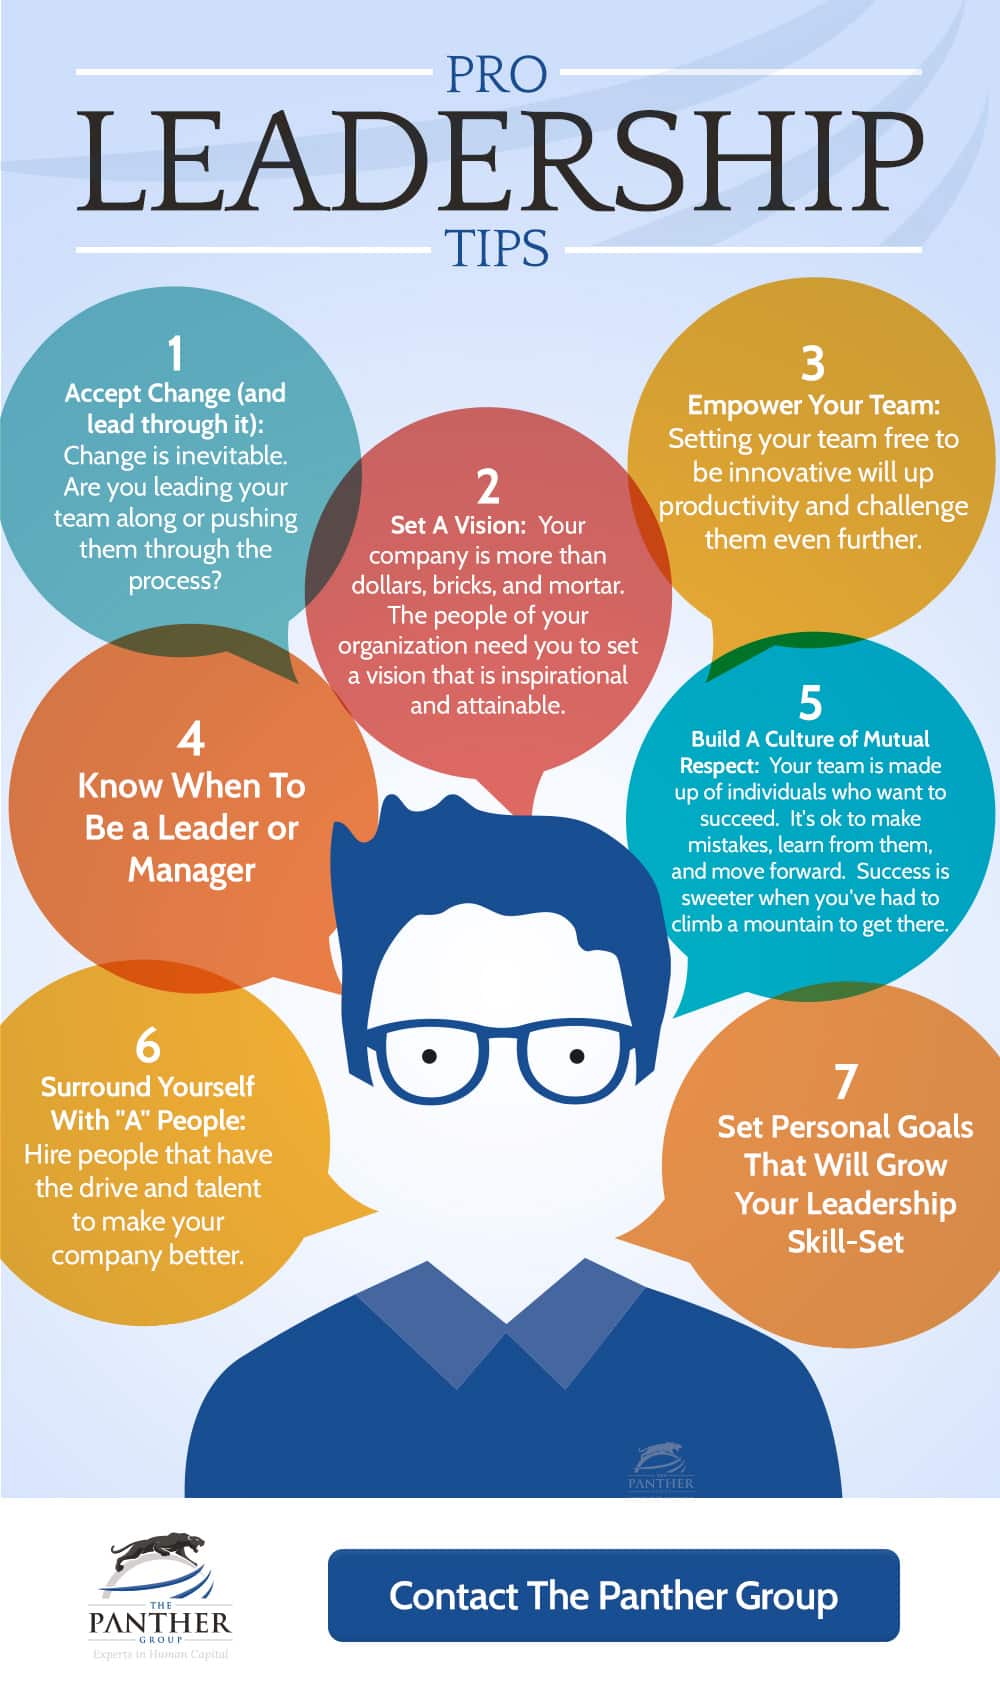 Pro Leadership Tips Infographic